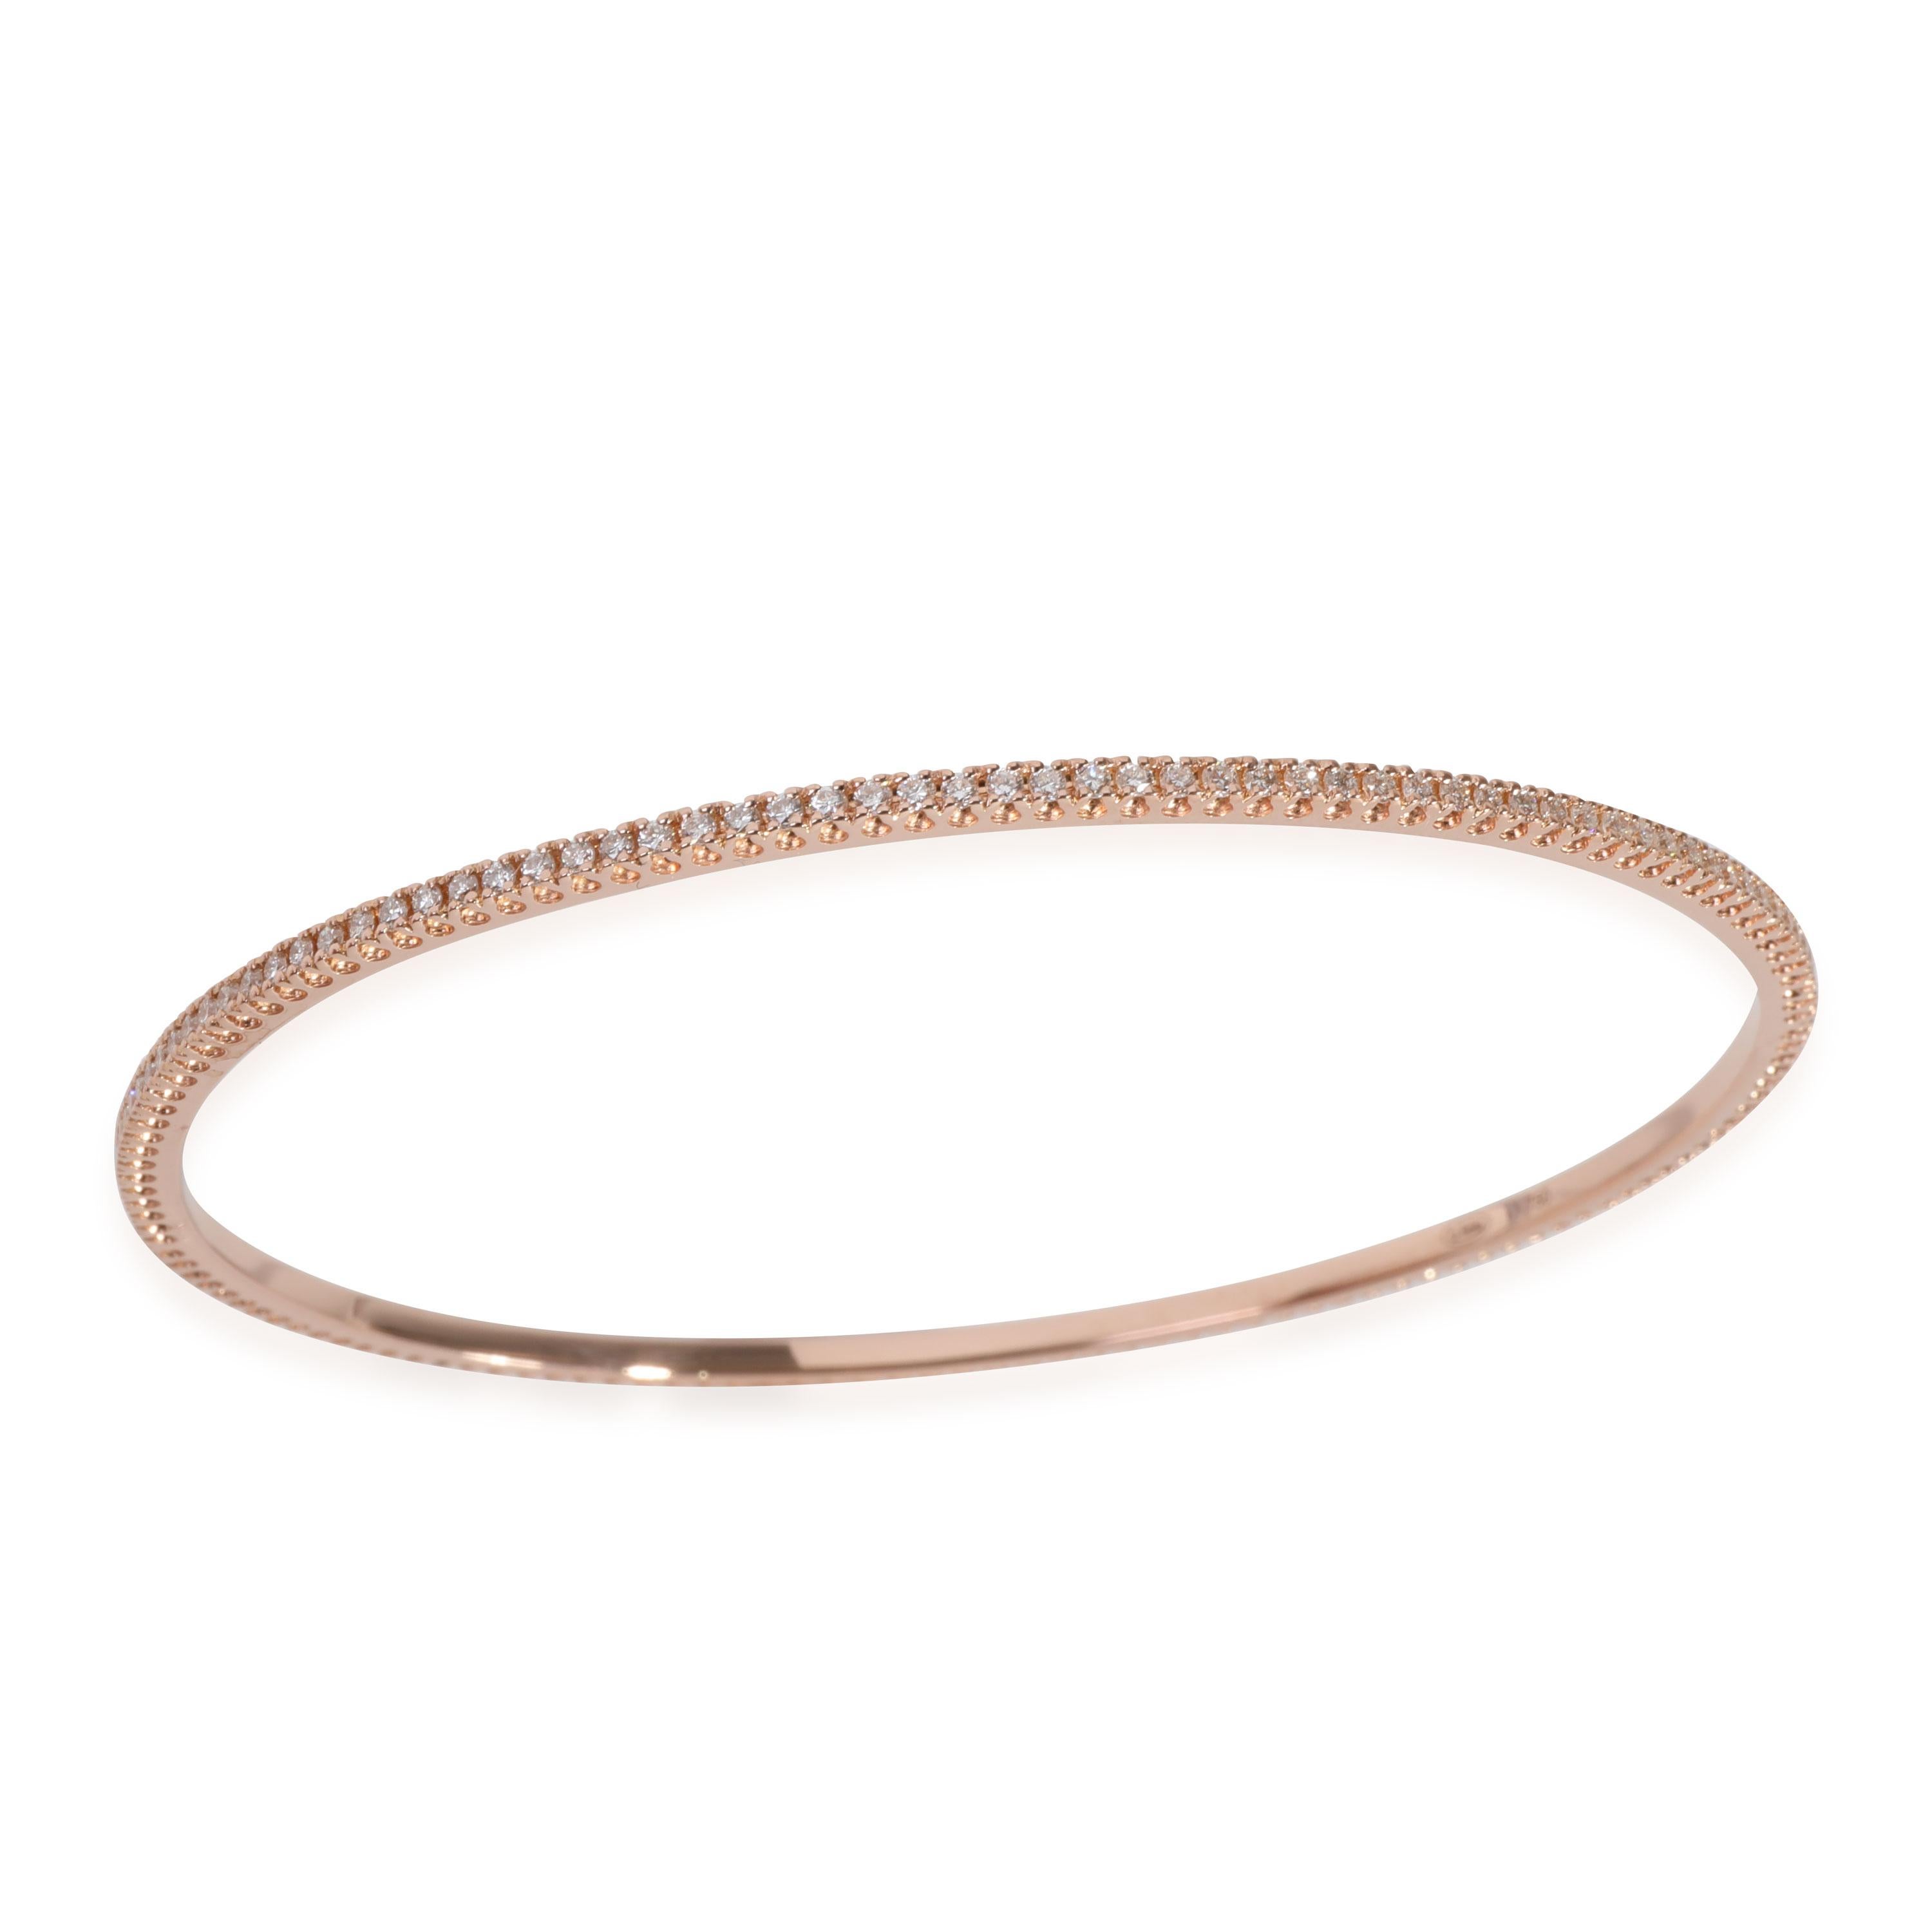 La Reina Diamond Bangle in 18k Rose Gold 1 CTW

PRIMARY DETAILS
SKU: 118058
Listing Title: La Reina Diamond Bangle in 18k Rose Gold 1 CTW
Condition Description: Retails for 3500 USD. In excellent condition and recently polished. Chain is 7.75 inches